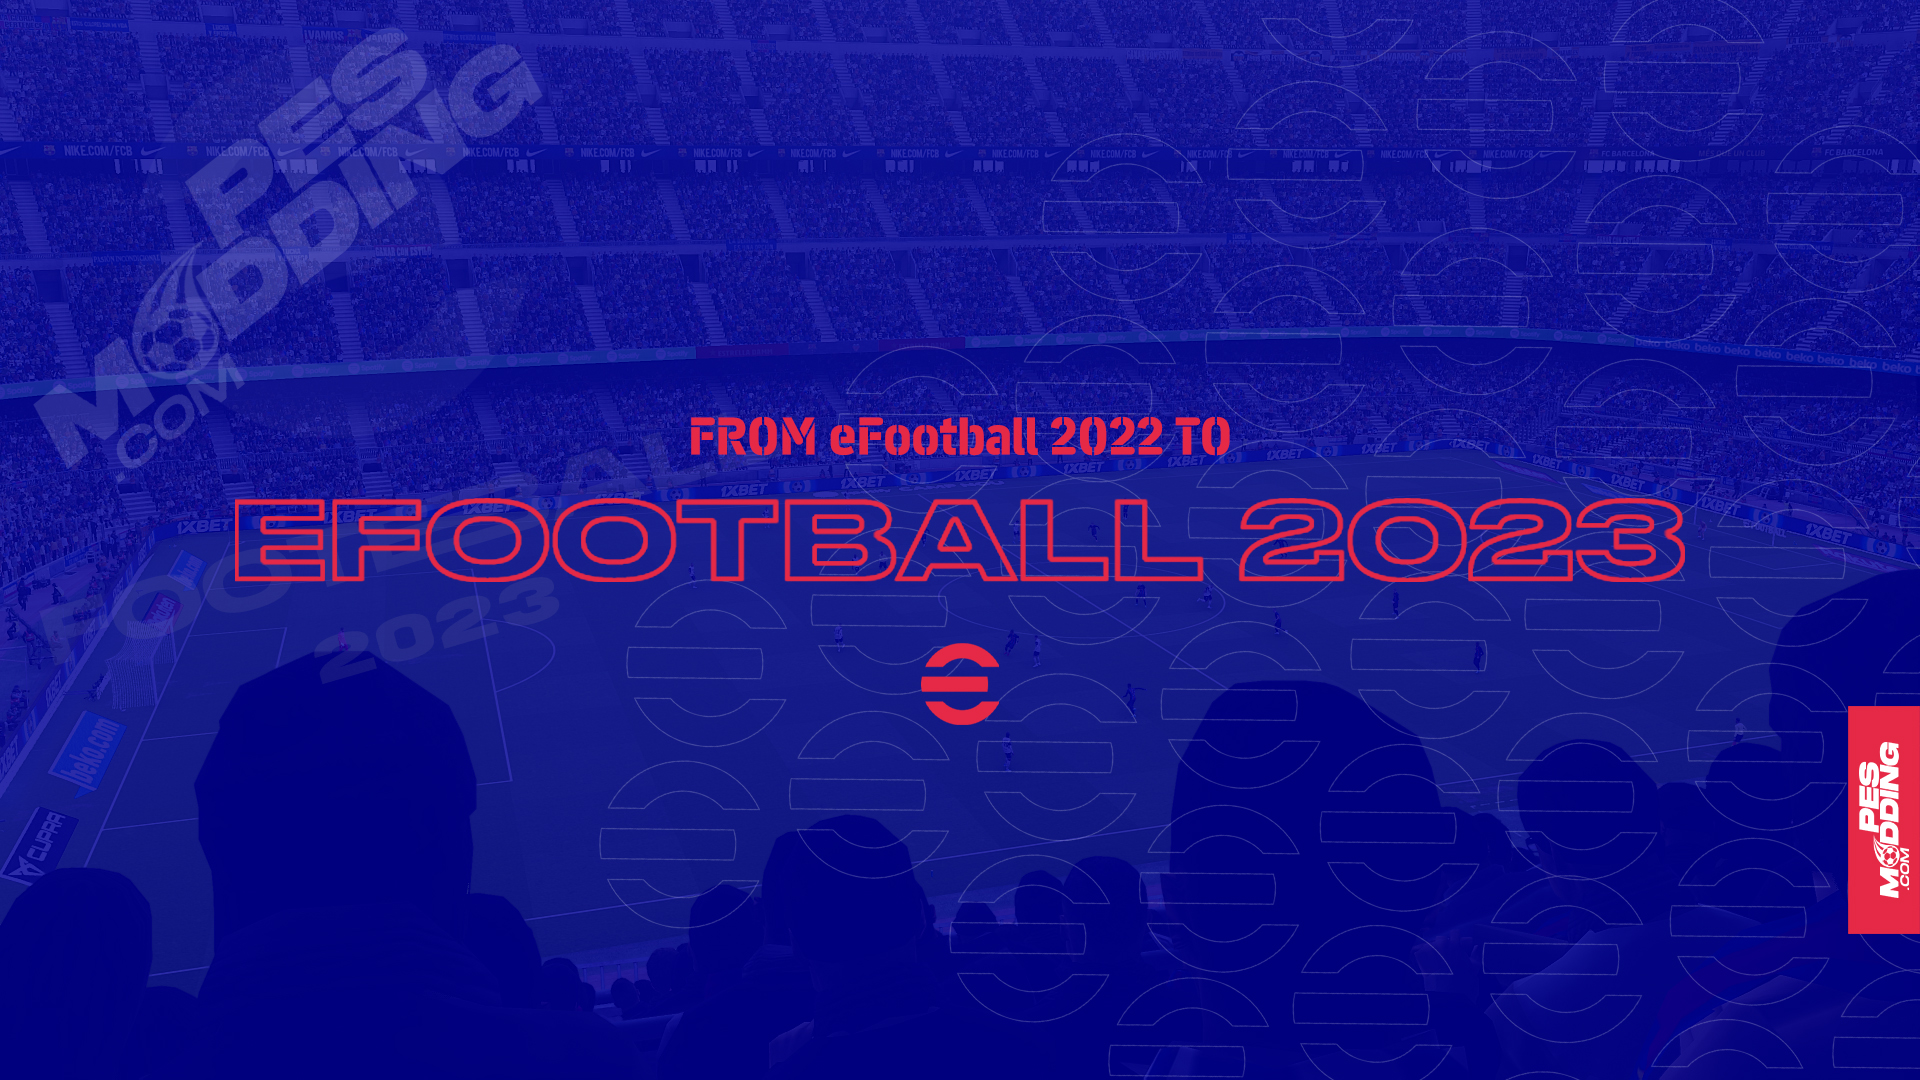 From eFootball 2022 to eFootball 2023 in late August